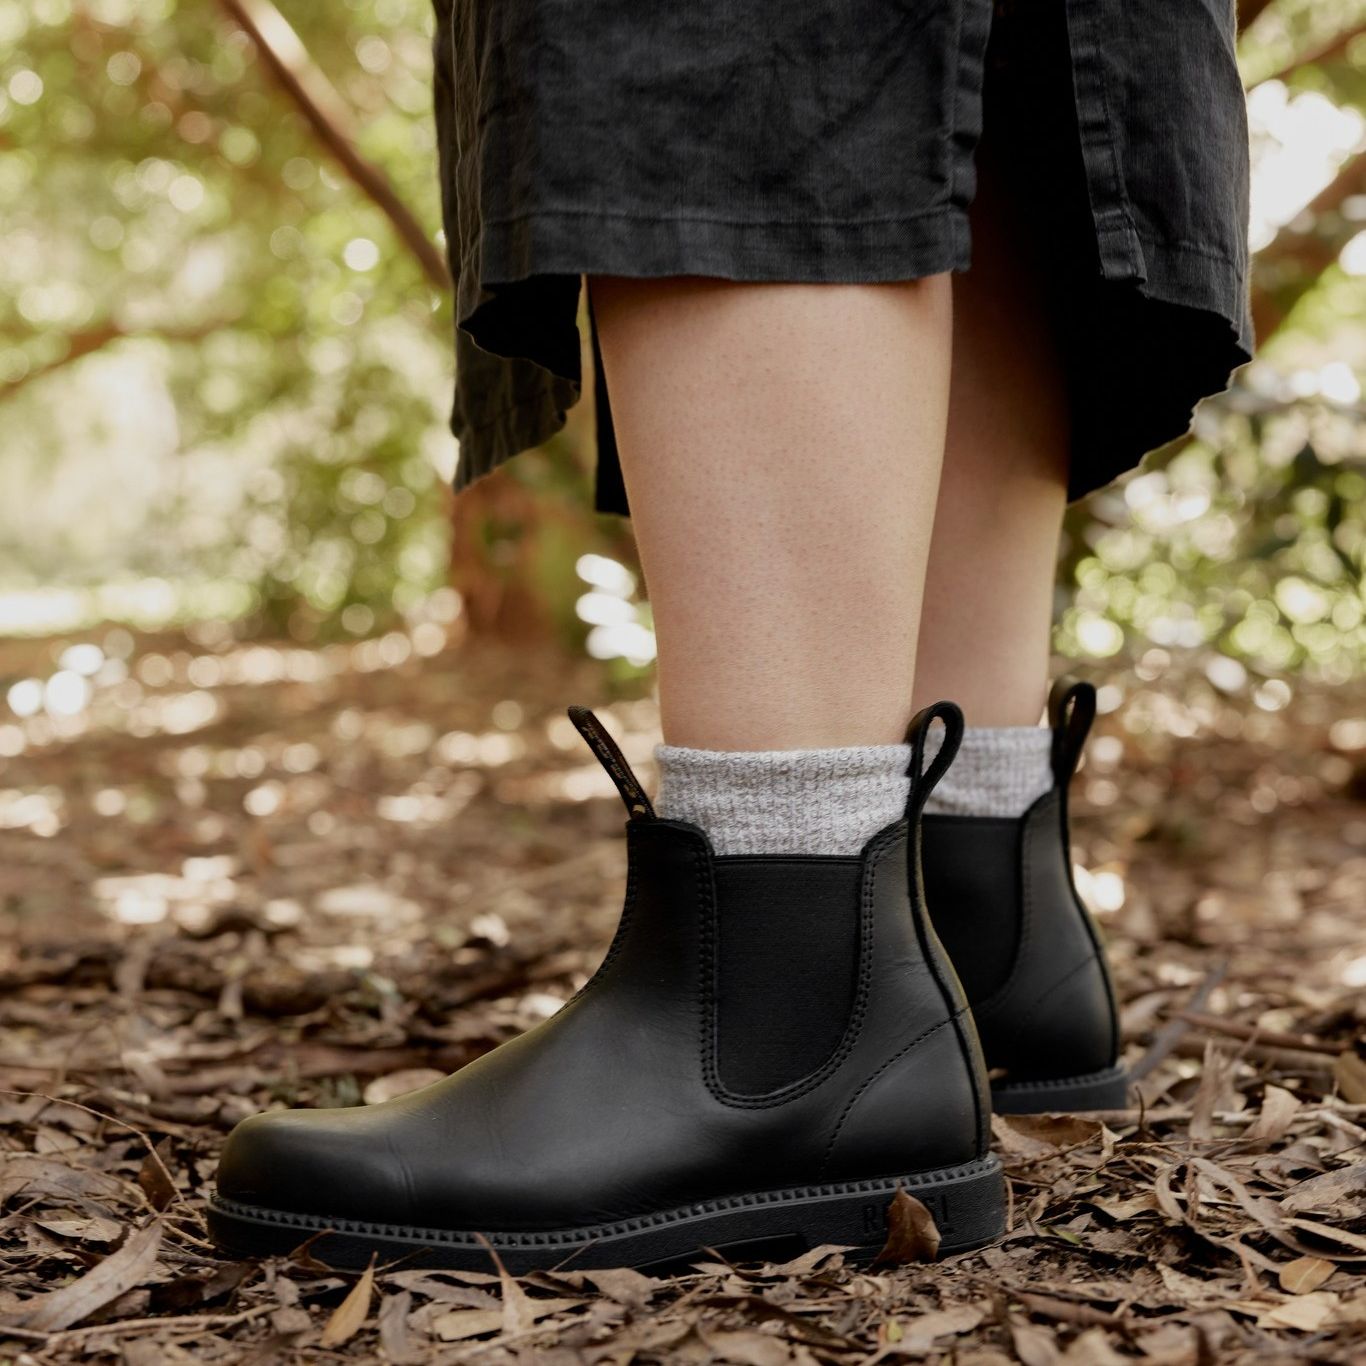 The Booma Boot

Highest-quality full grain kip leather, ...

Shop the Booma range via the link in bio. 

#RossiBoots